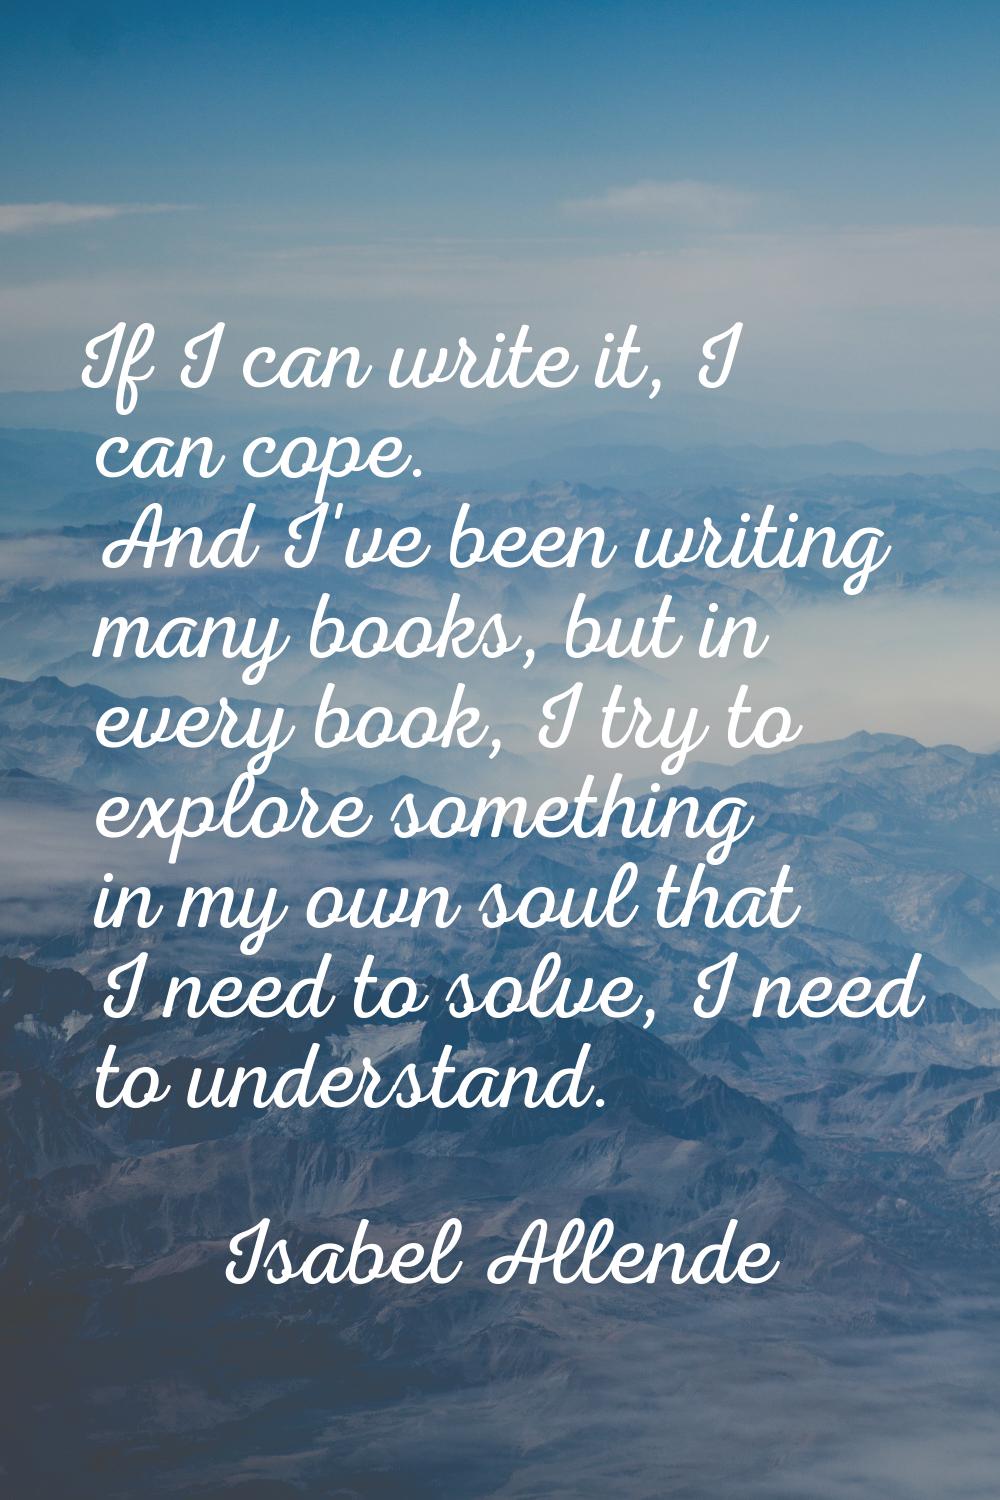 If I can write it, I can cope. And I've been writing many books, but in every book, I try to explor